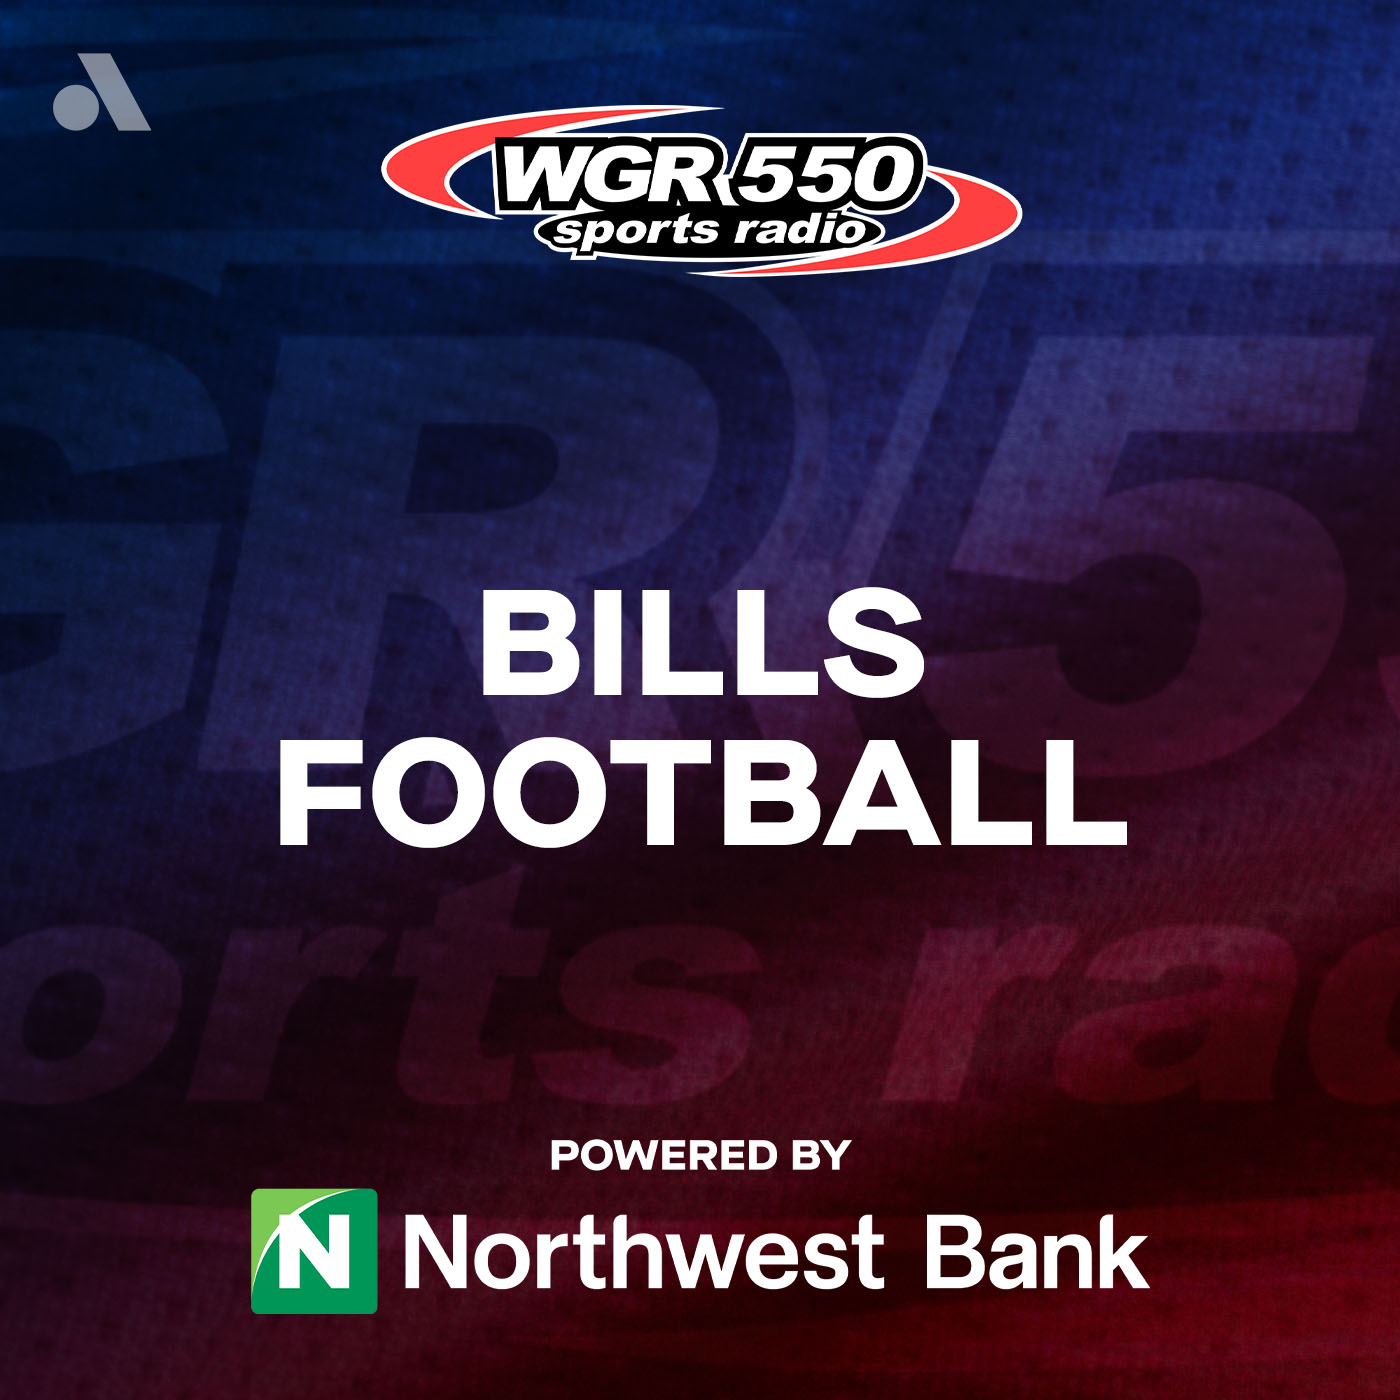 08-26 Bills-Bears Postgame Show with Nate Geary - Bills Football